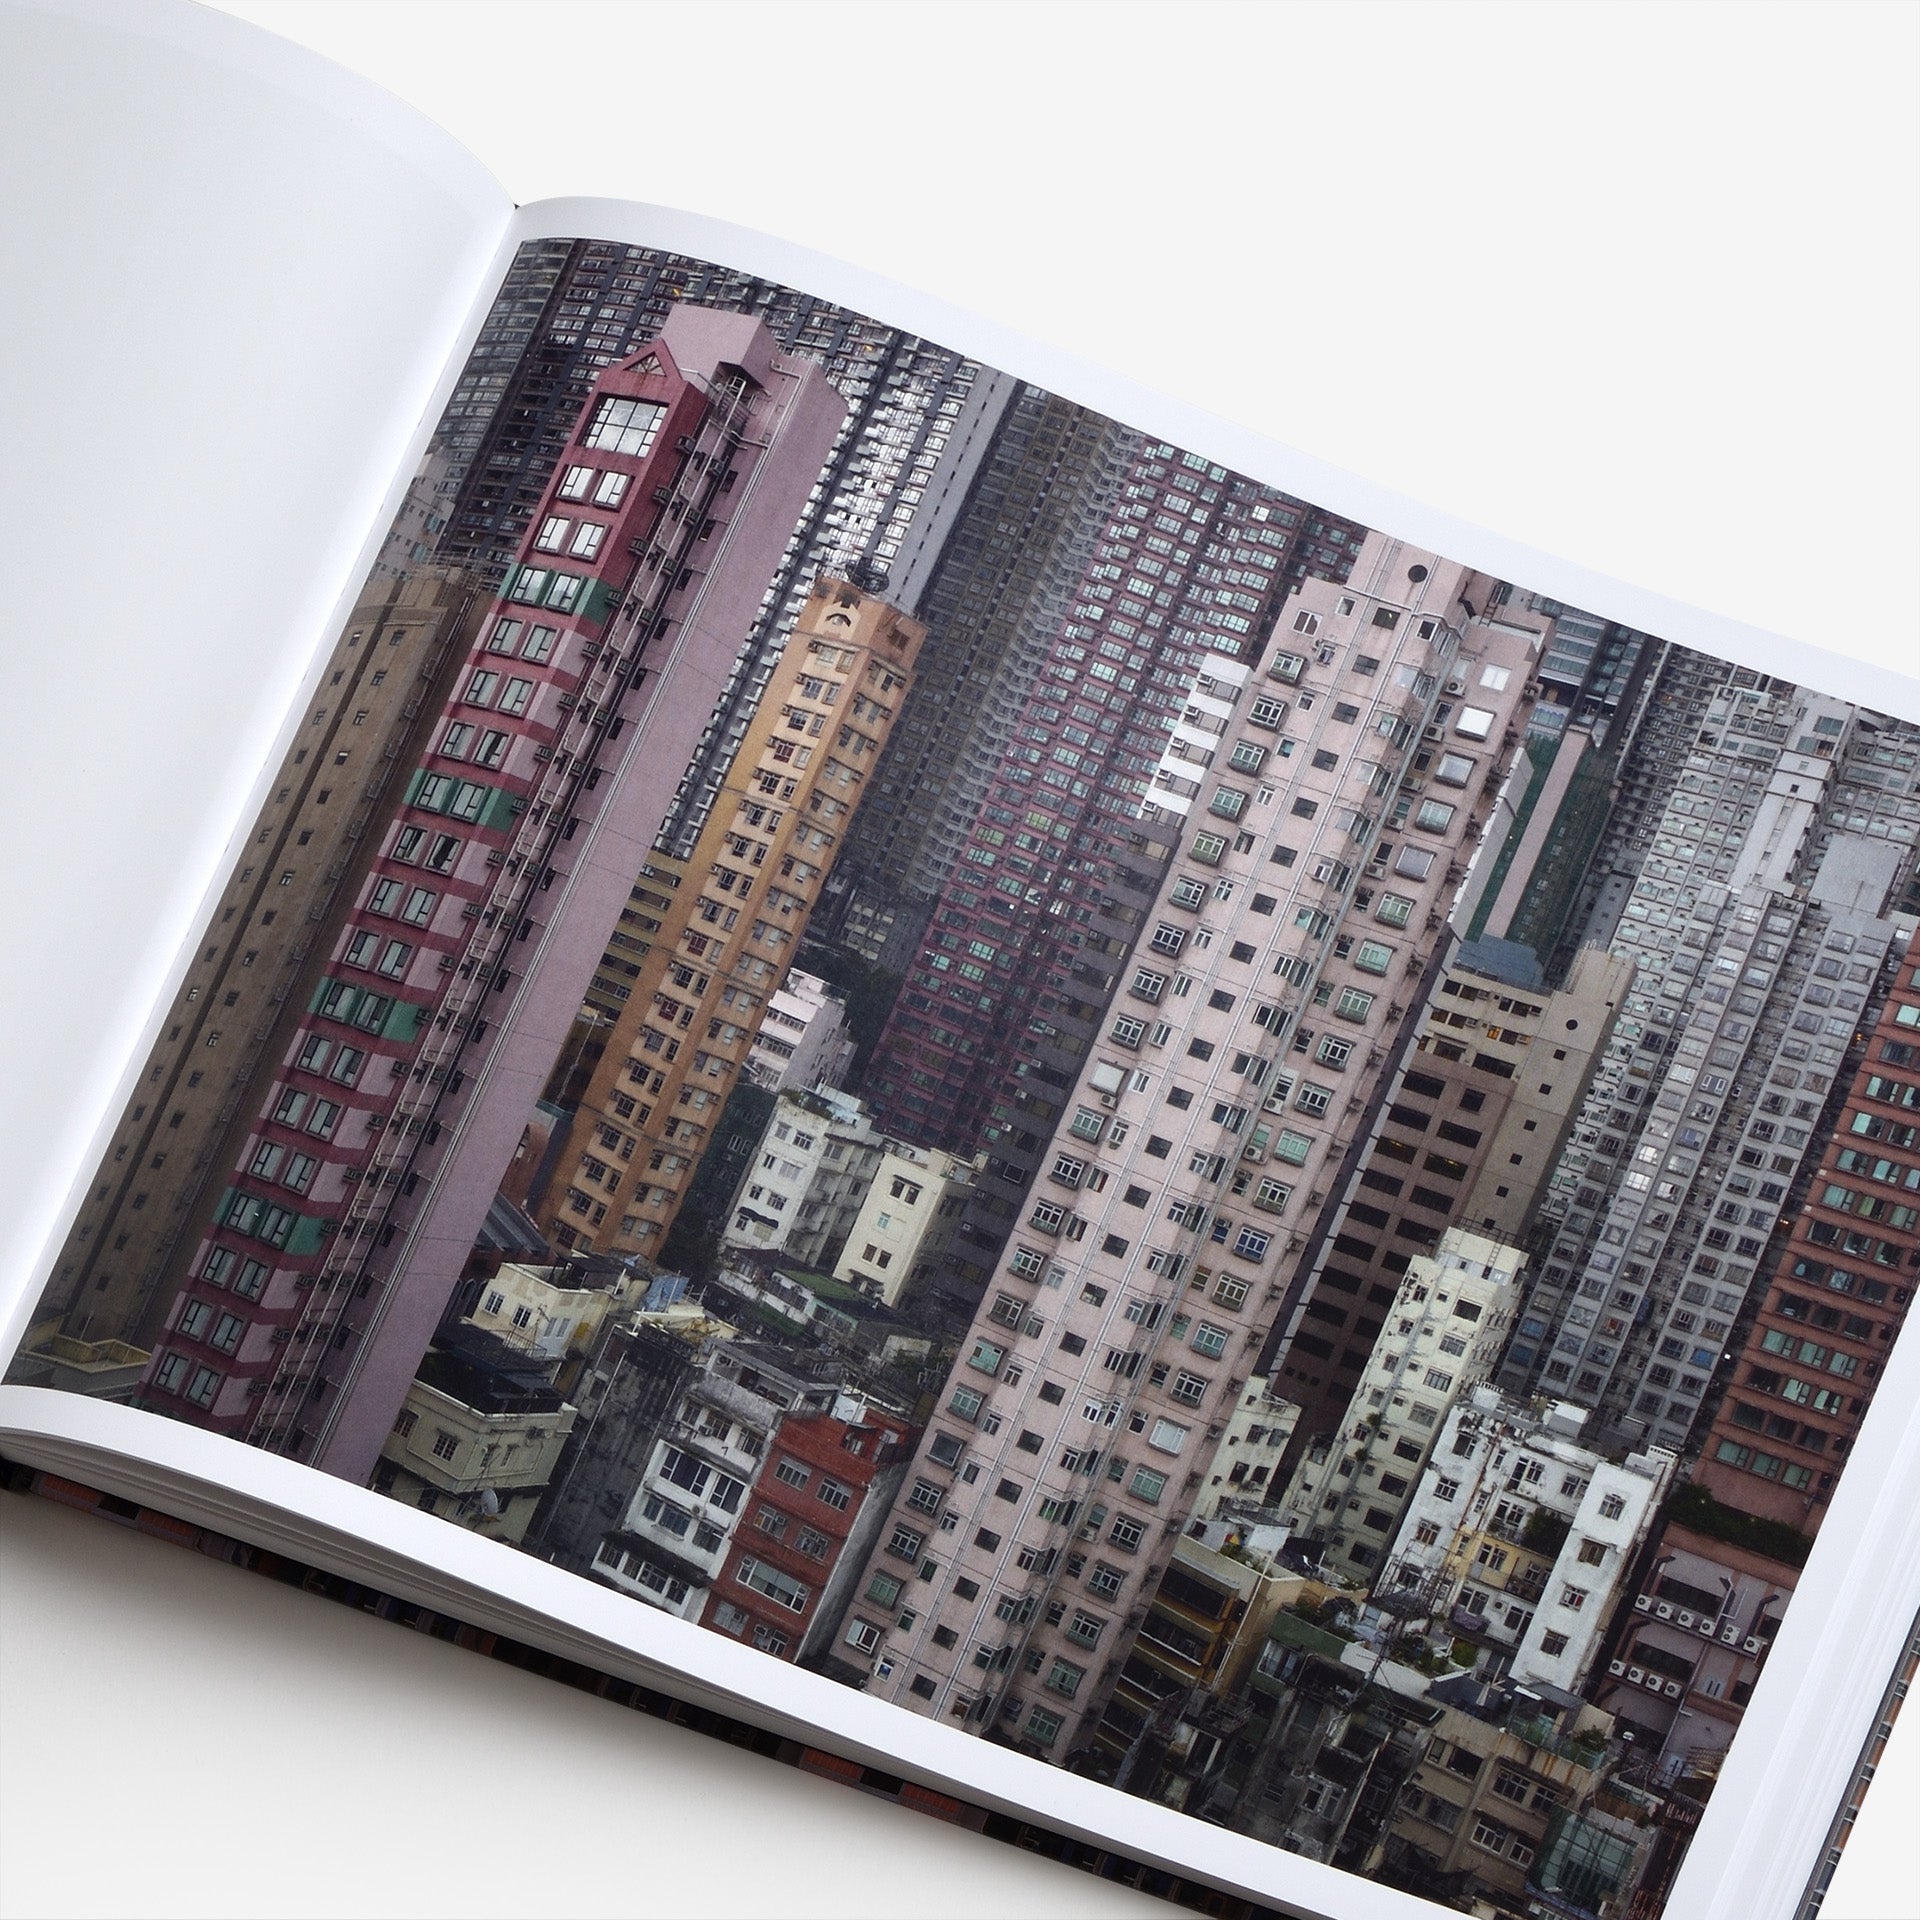 Michael Wolf: Architecture of Density Hong Kong | North East